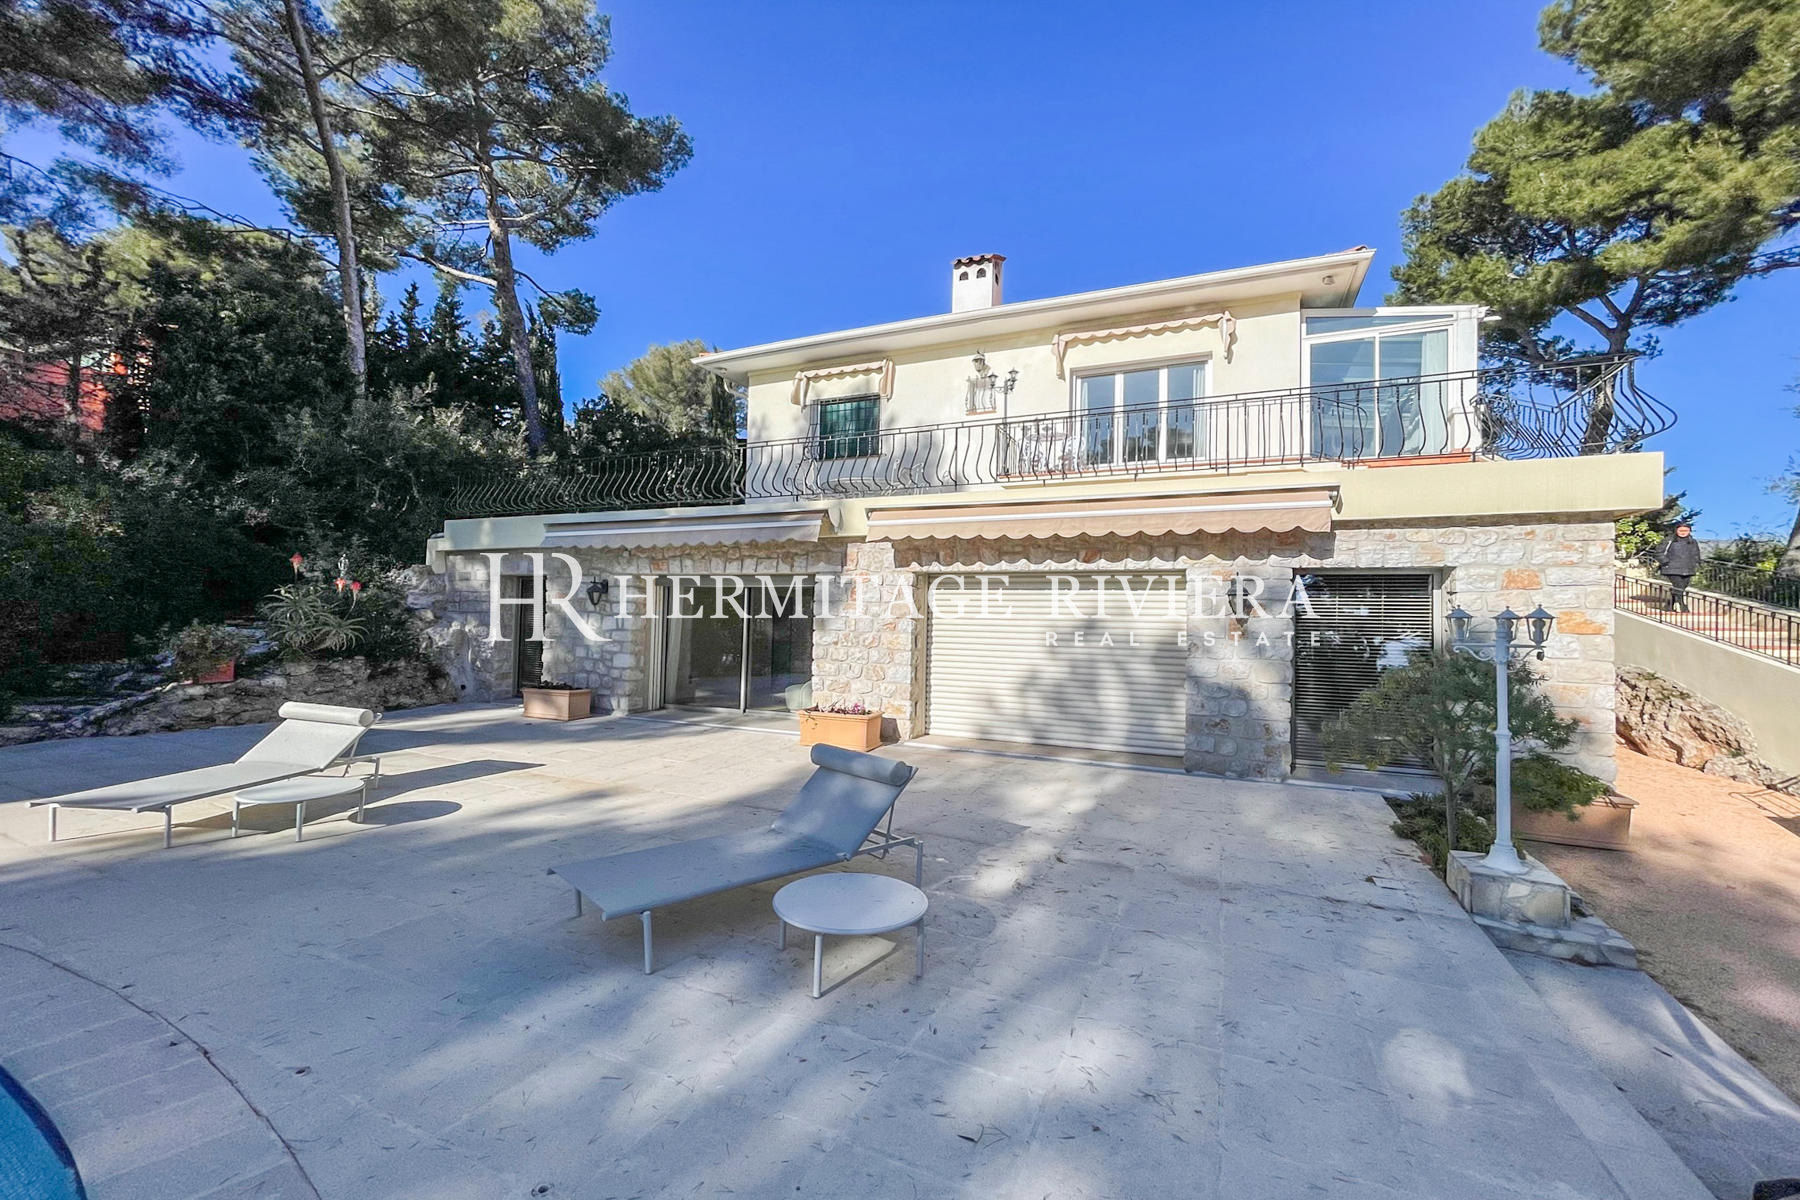 Property with views Monaco in sought after location (image 3)